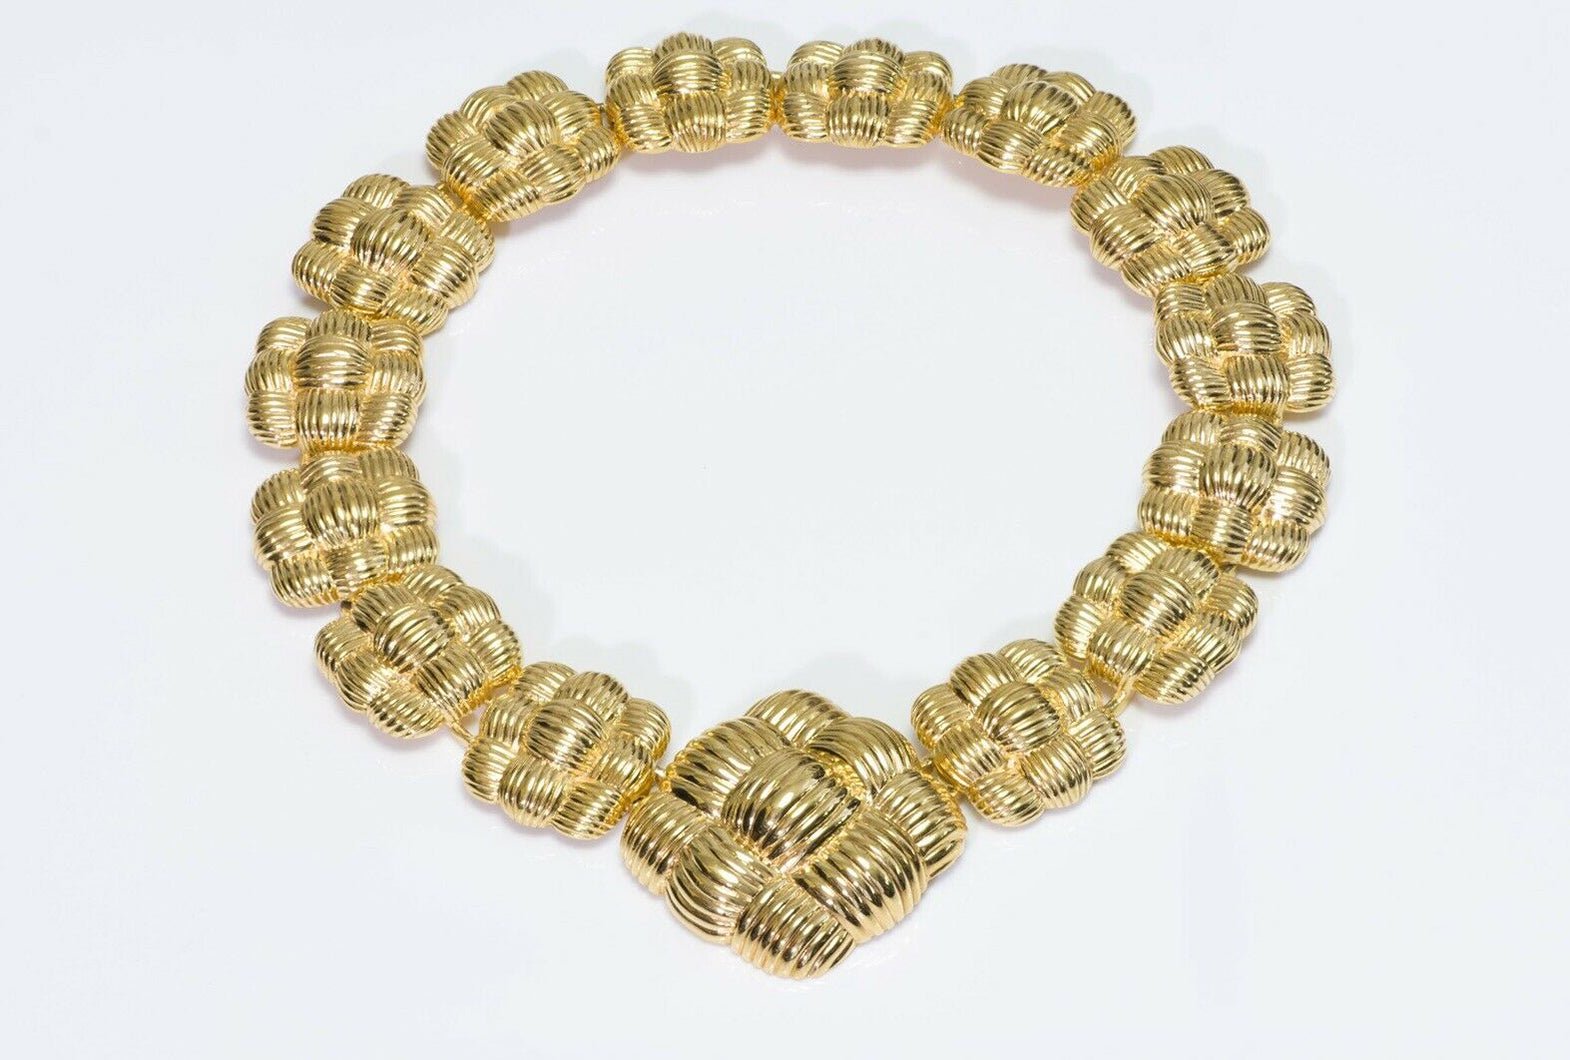 Vintage FENDI Chunky Link Textured Woven Collar Necklace